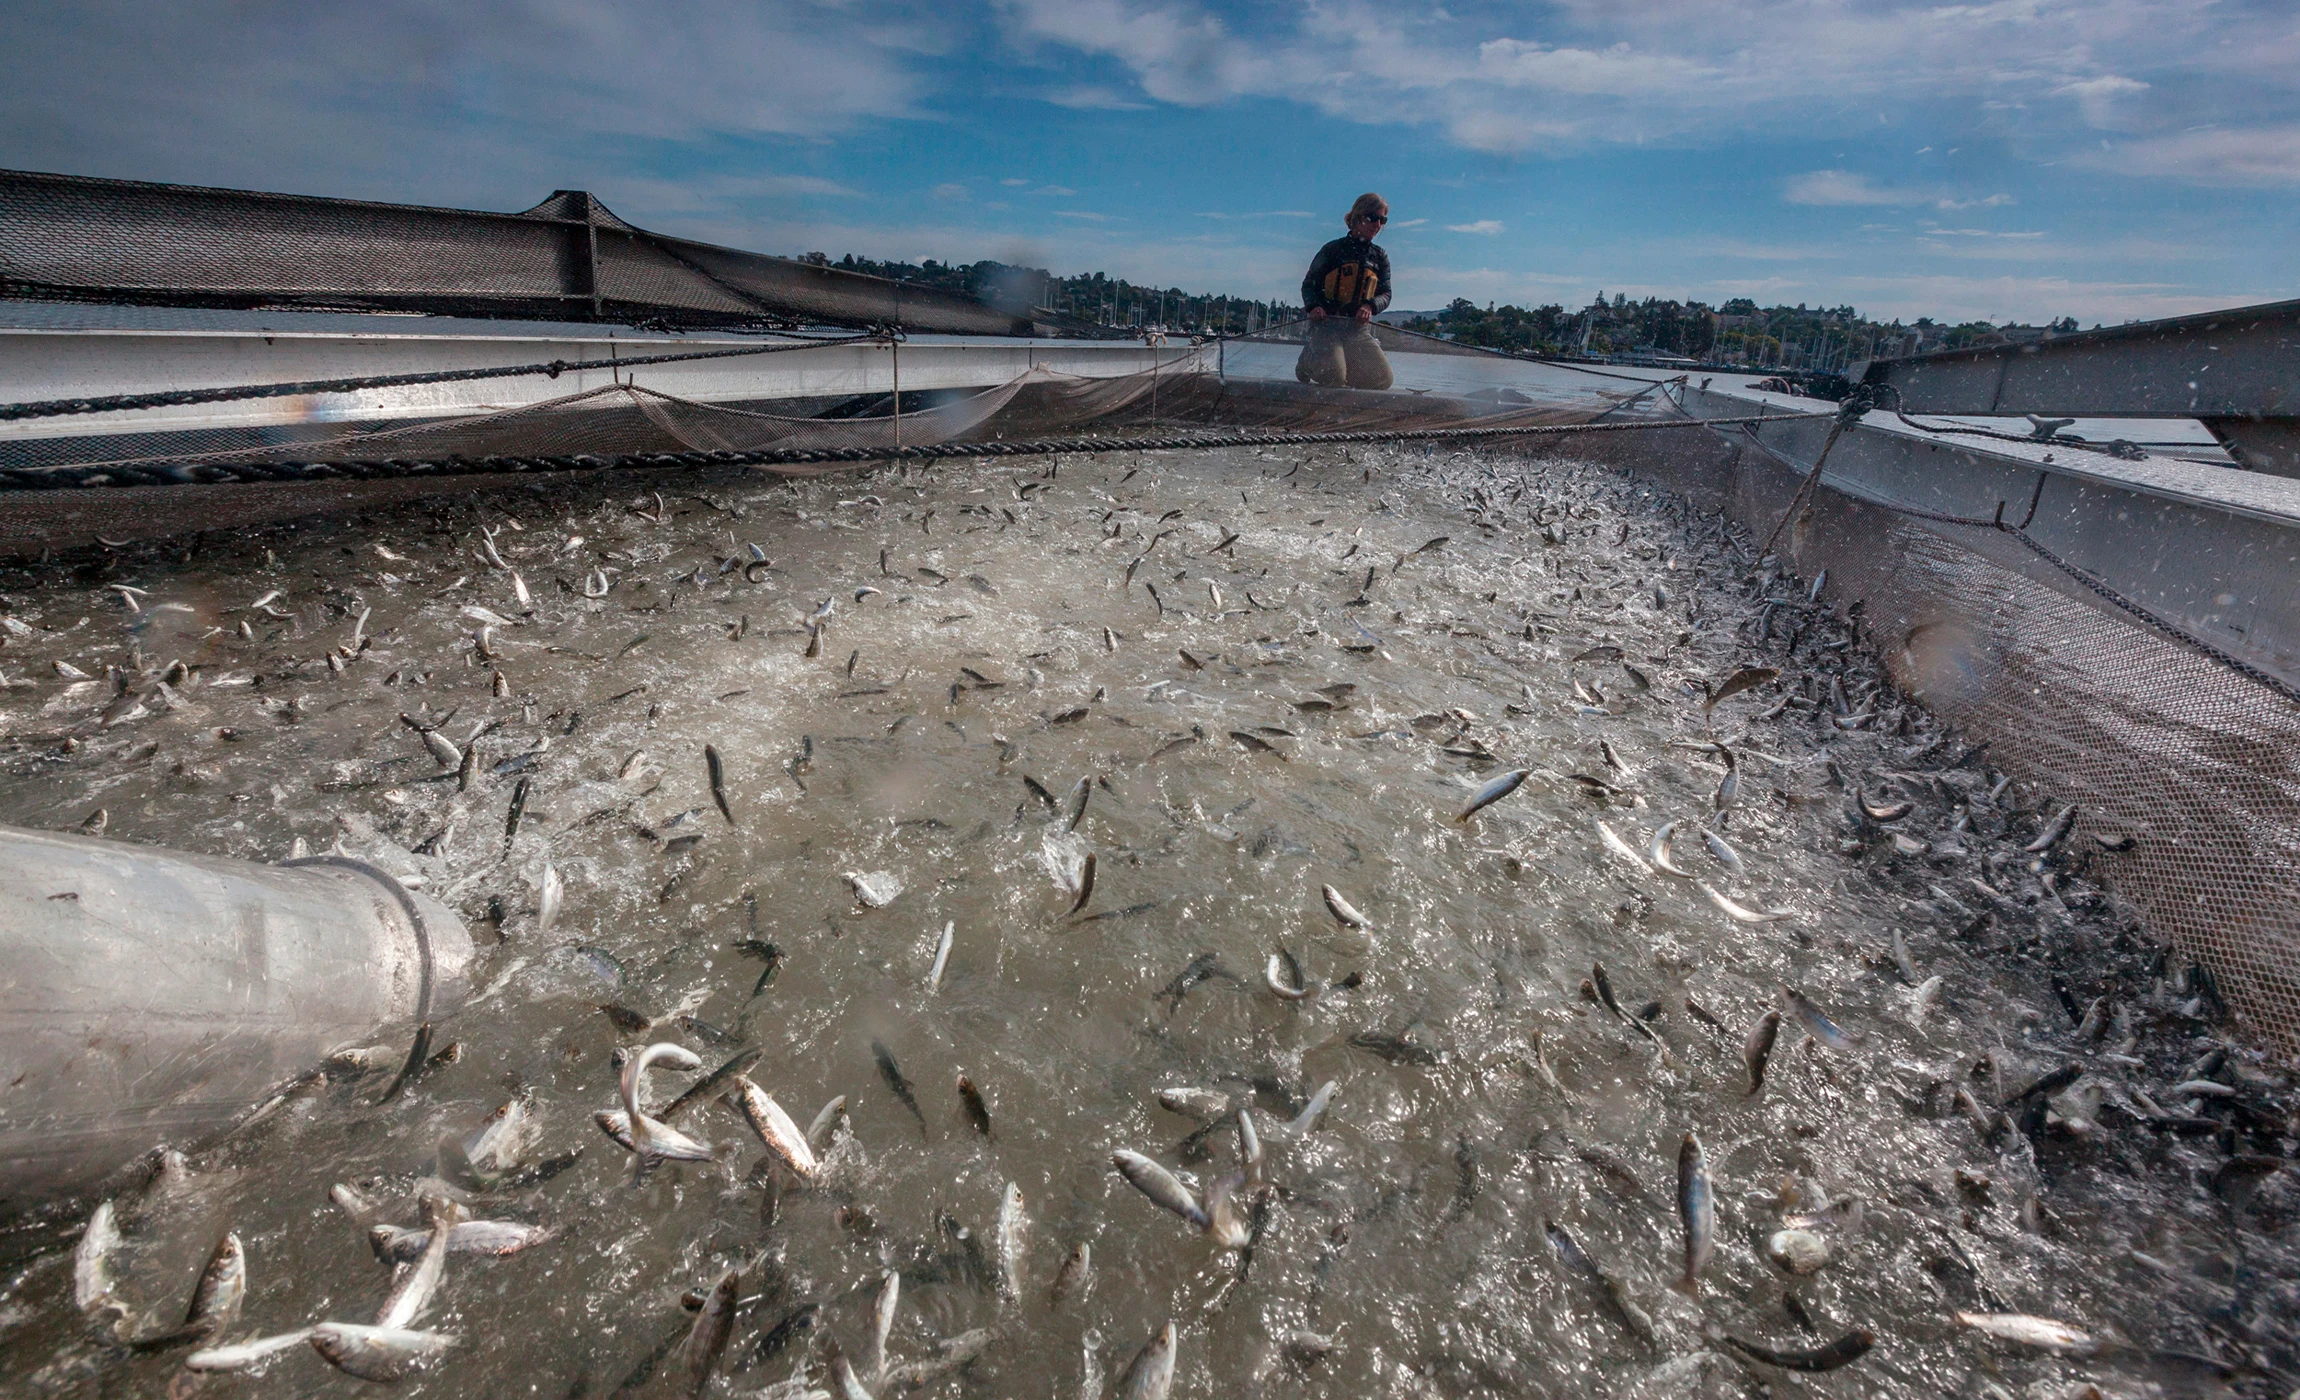 Hatchery chinook salmon smolts released into a net. (Photo by Cavan Images/Alamy Stock Photo)